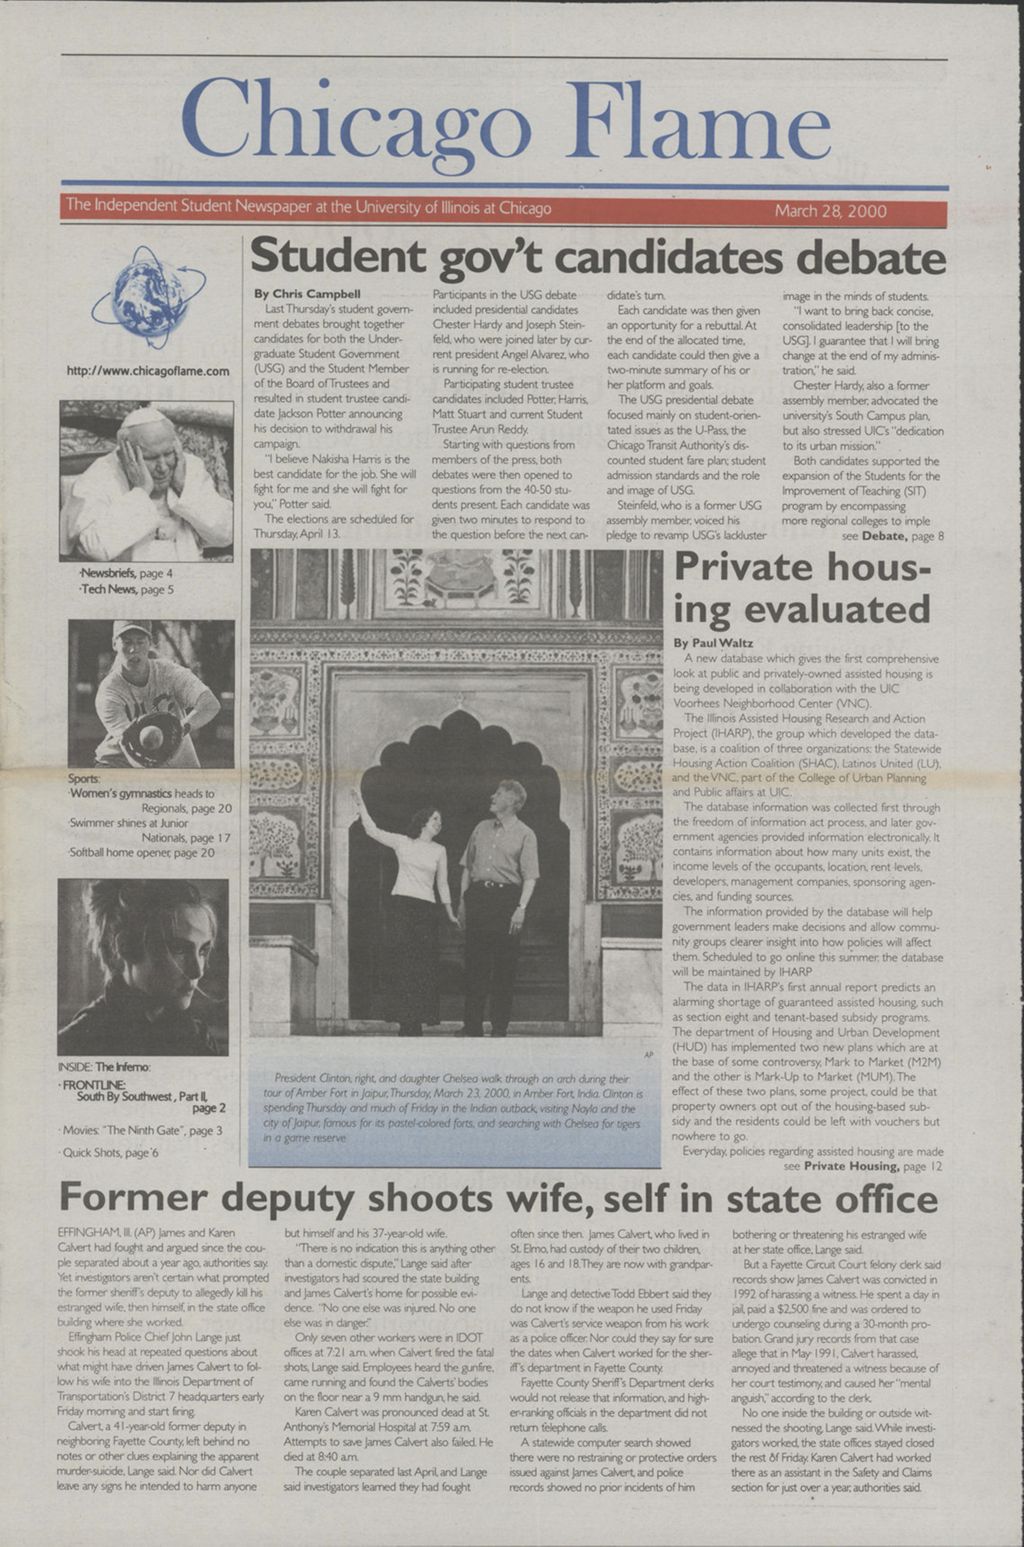 Chicago Flame (March 28, 2000)